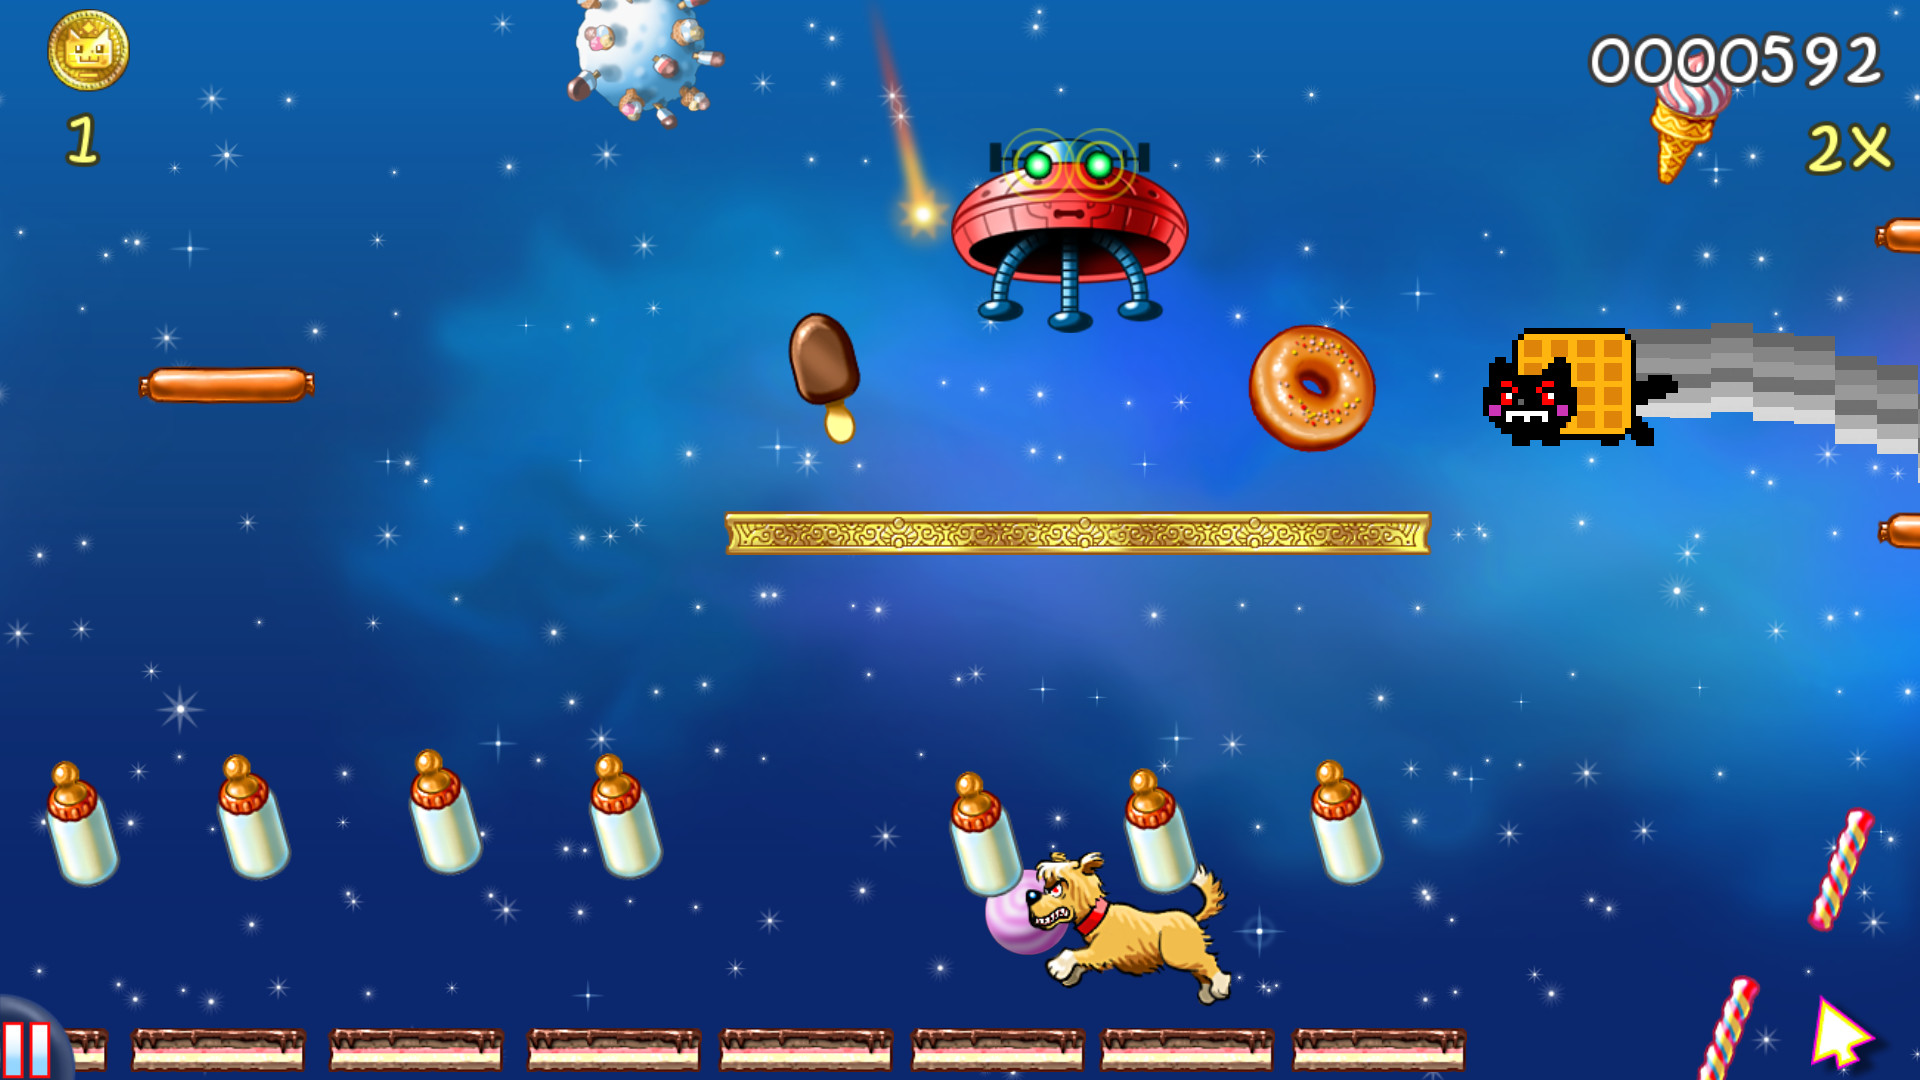 nyan cat lost in space hacked